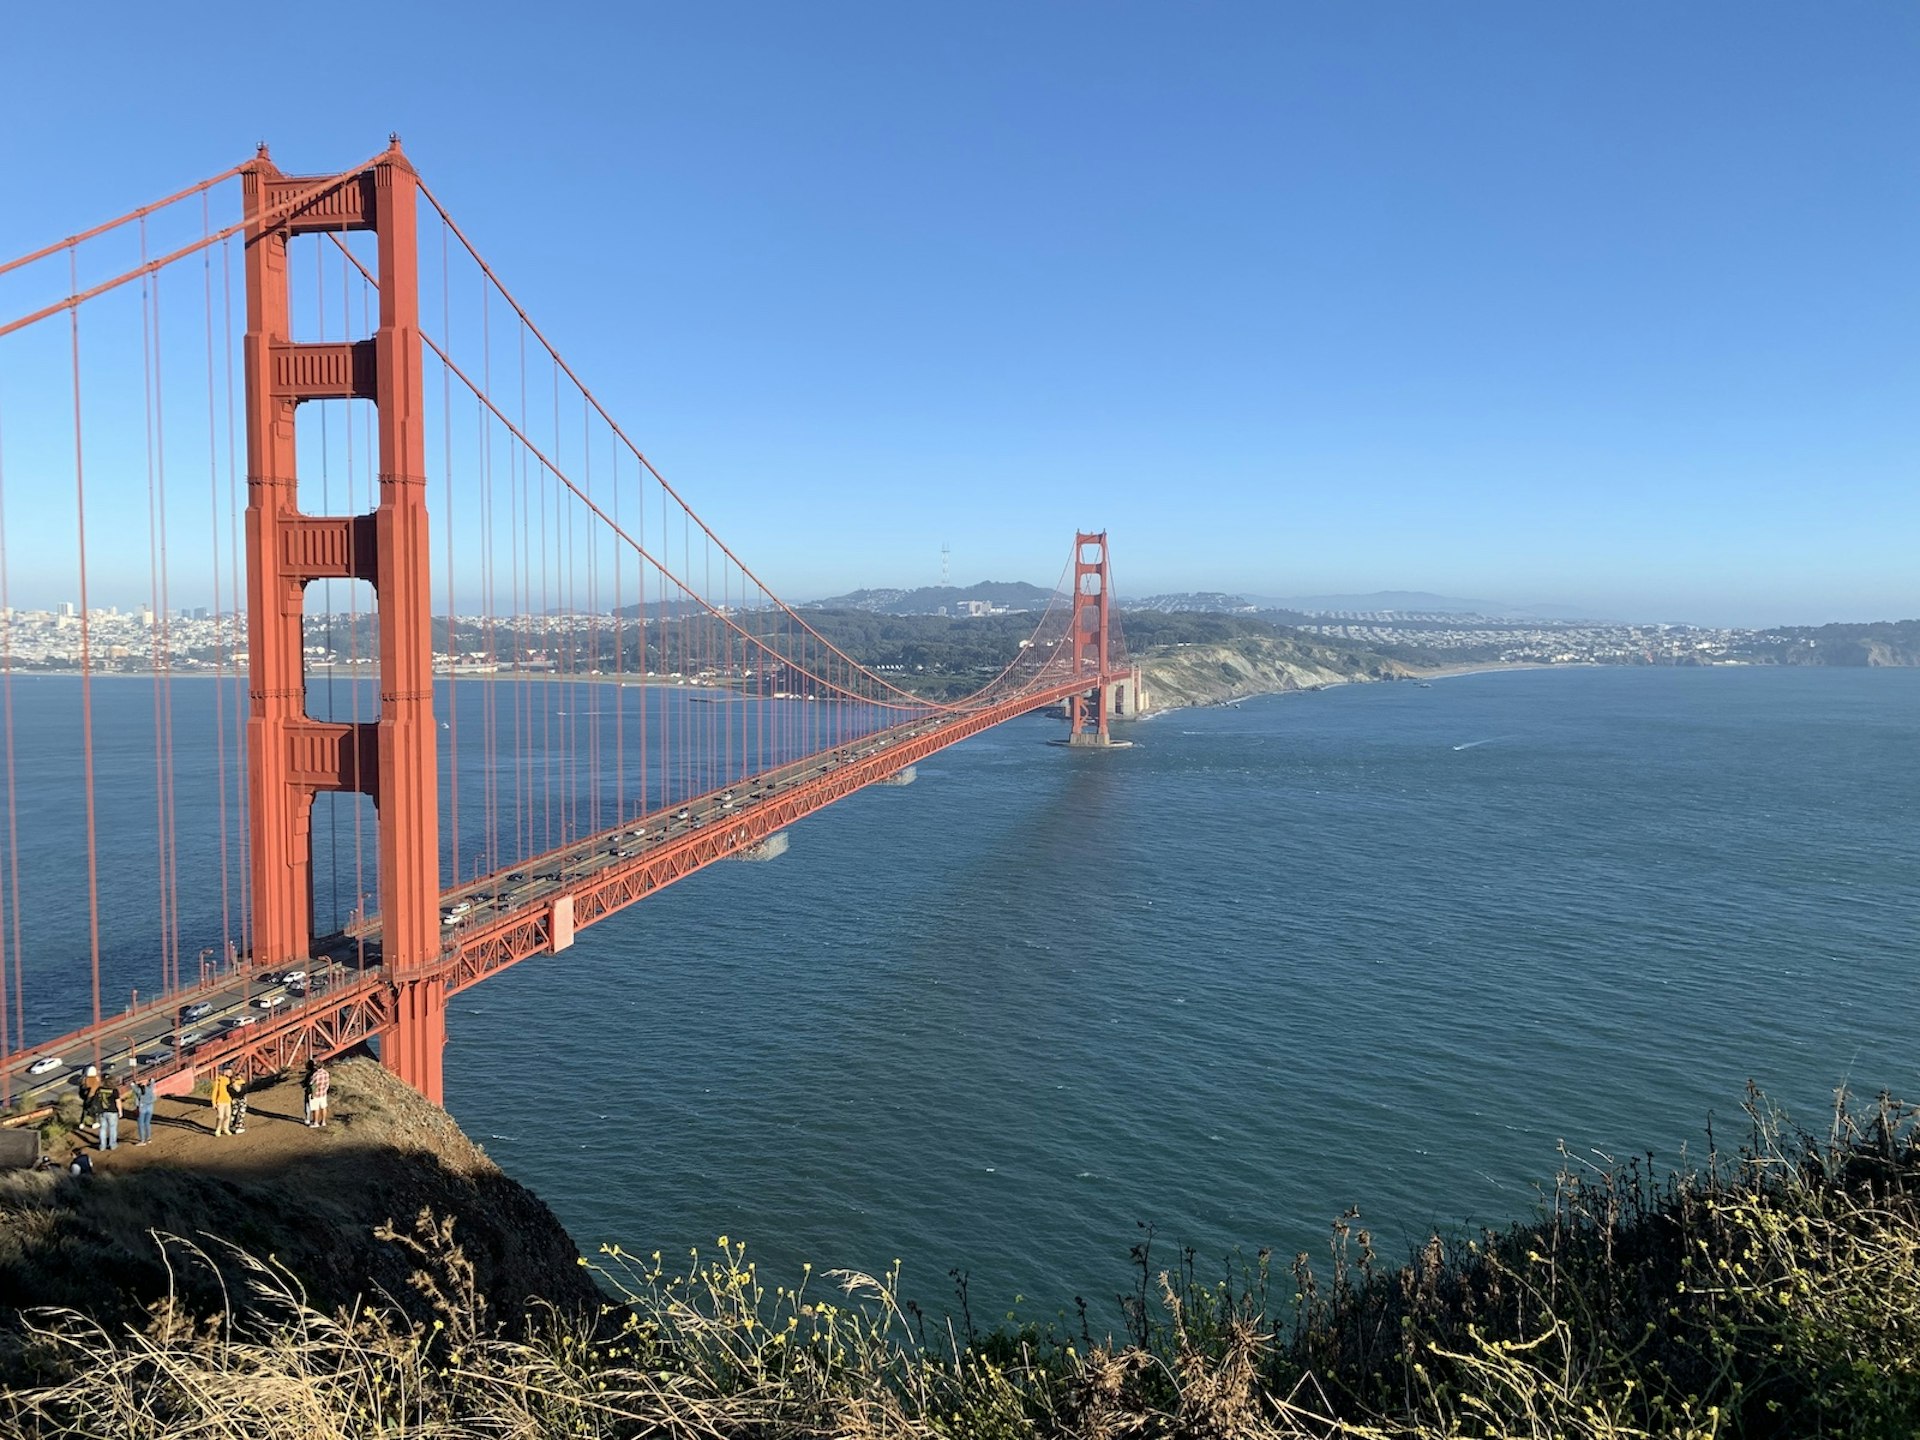 View of the Golden Gate Bridge, a small crowd of people visible at ground level